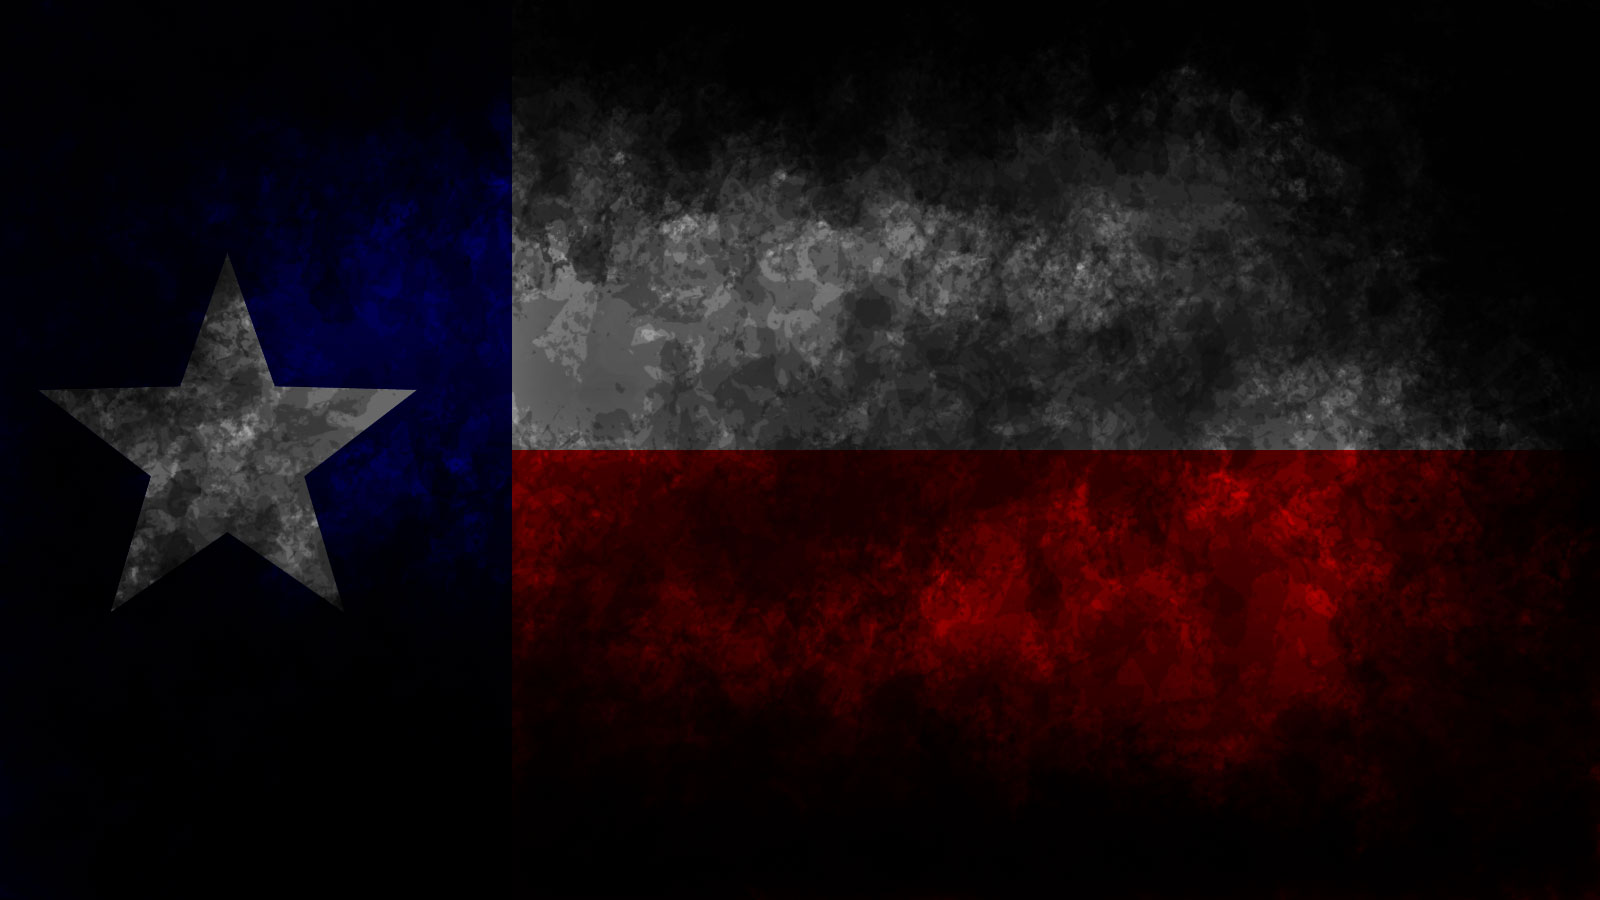 Free download 44] Texas State Wallpaper [1600x900] for your Desktop, Mobile & Tablet. Explore TX Wallpaper. TX Wallpaper, Wallpaper Dallas TX, Wallpaper Houston TX